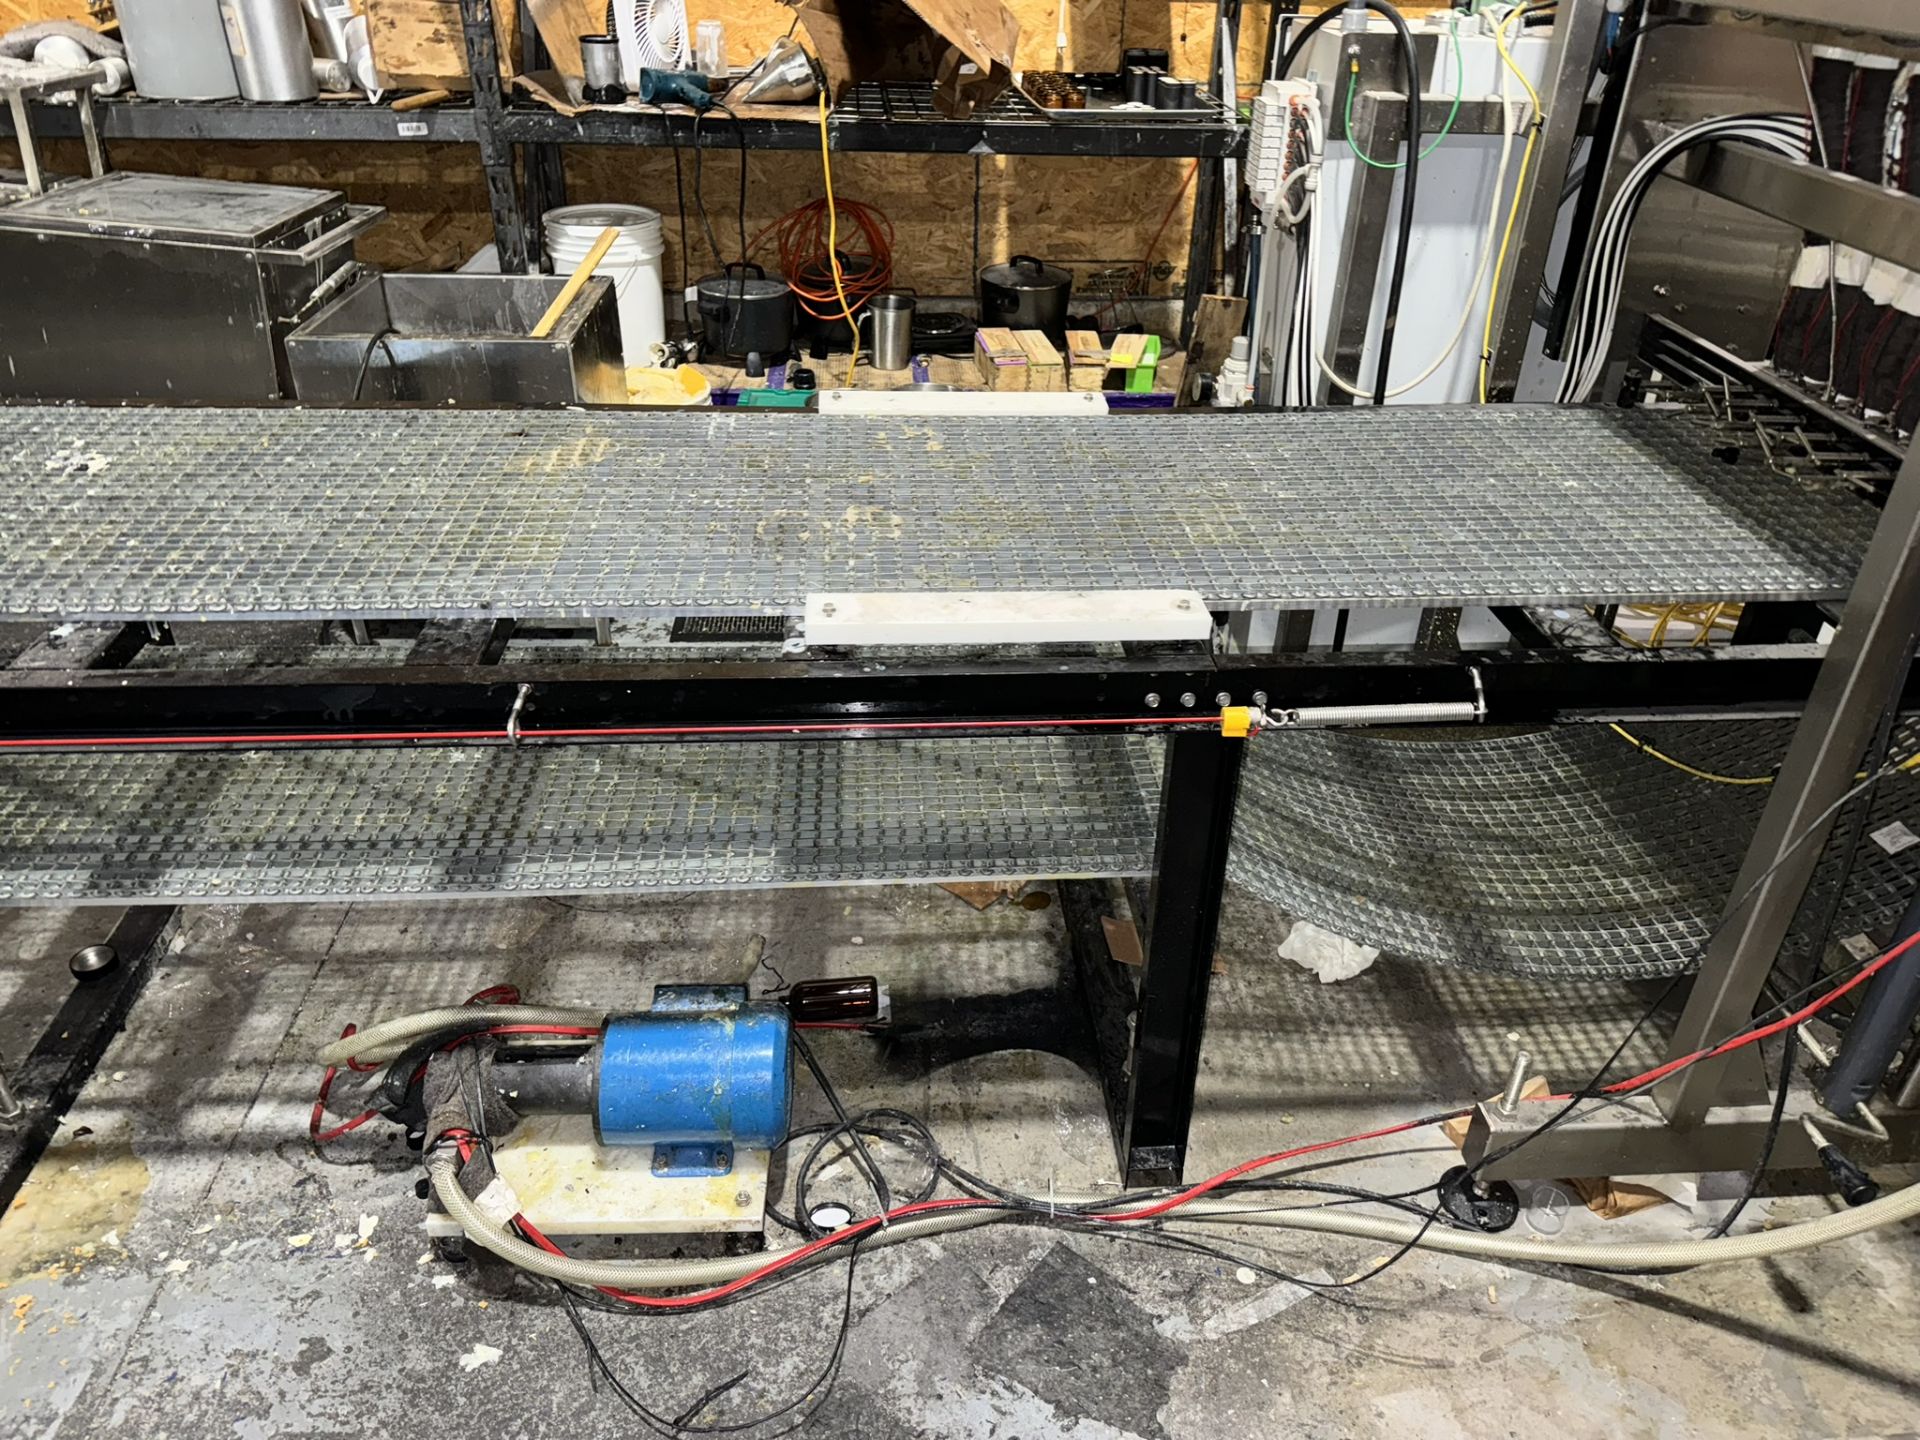 2018 E-PAK Cooling Conveyor, S/N 0318-47616-216-045, 115 Volts, 1 Phase, with Control Panel with - Image 11 of 11